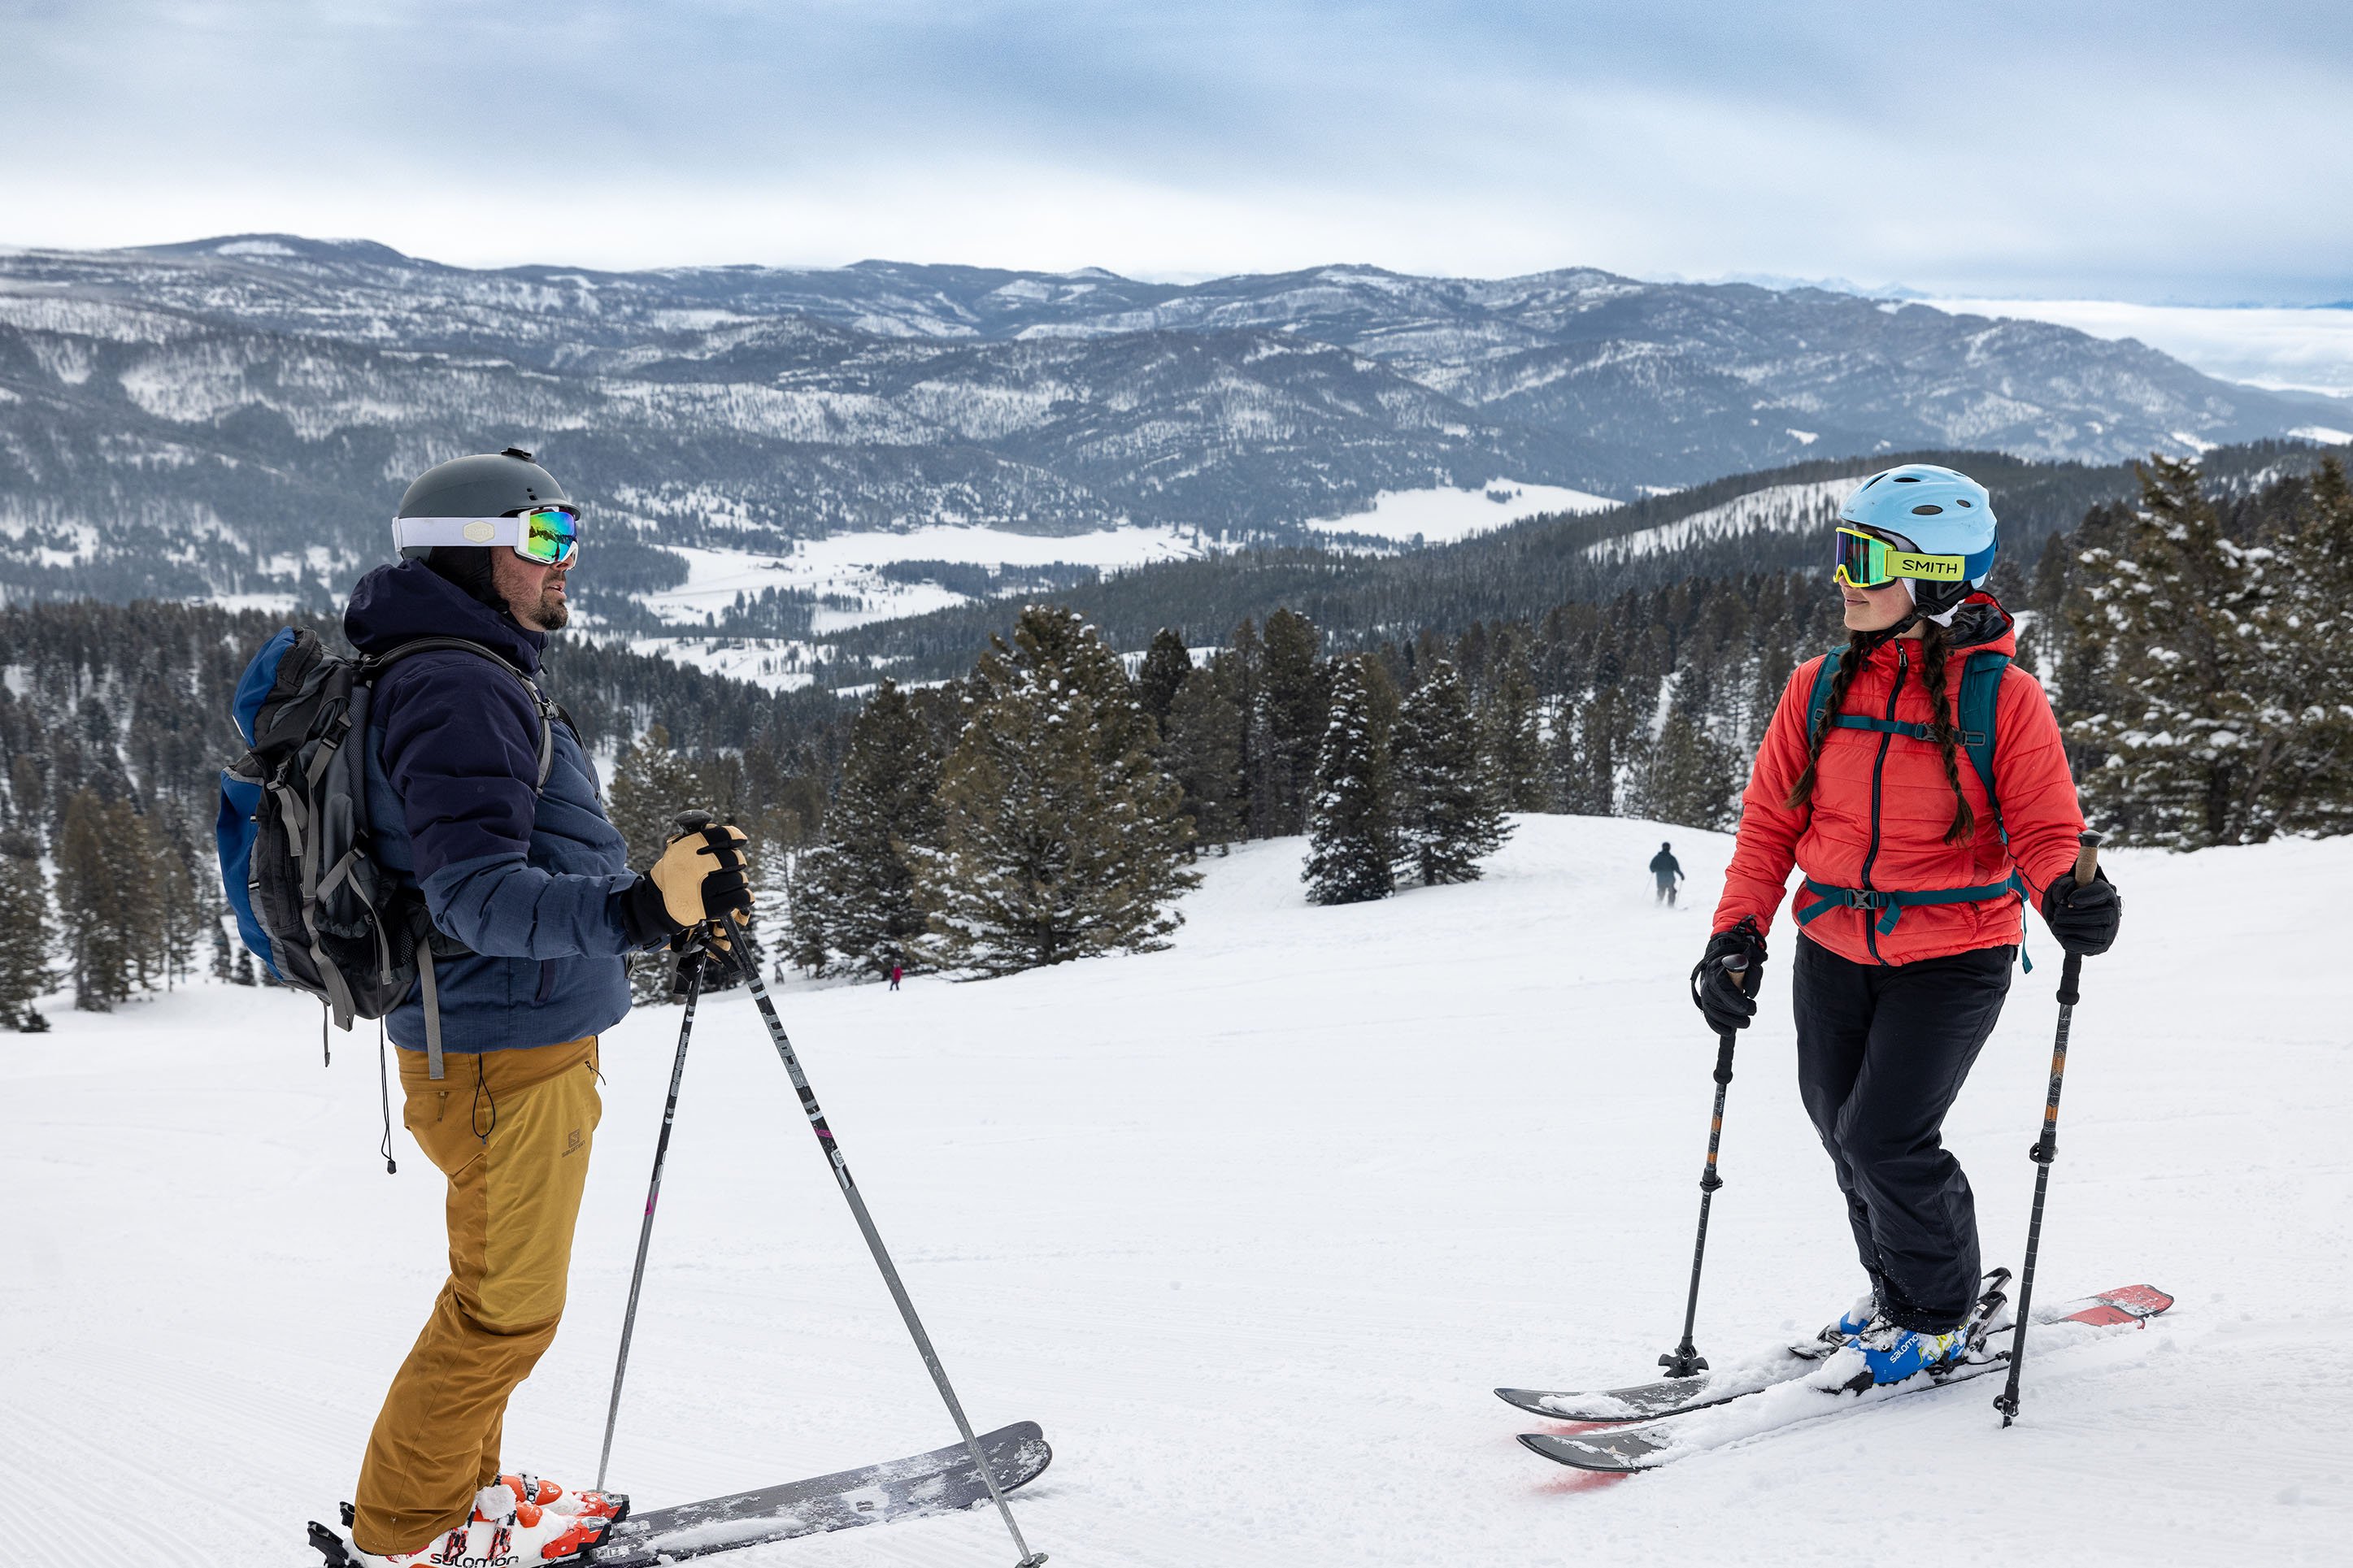 Why Bozeman Is One Of The West's Best Ski Towns